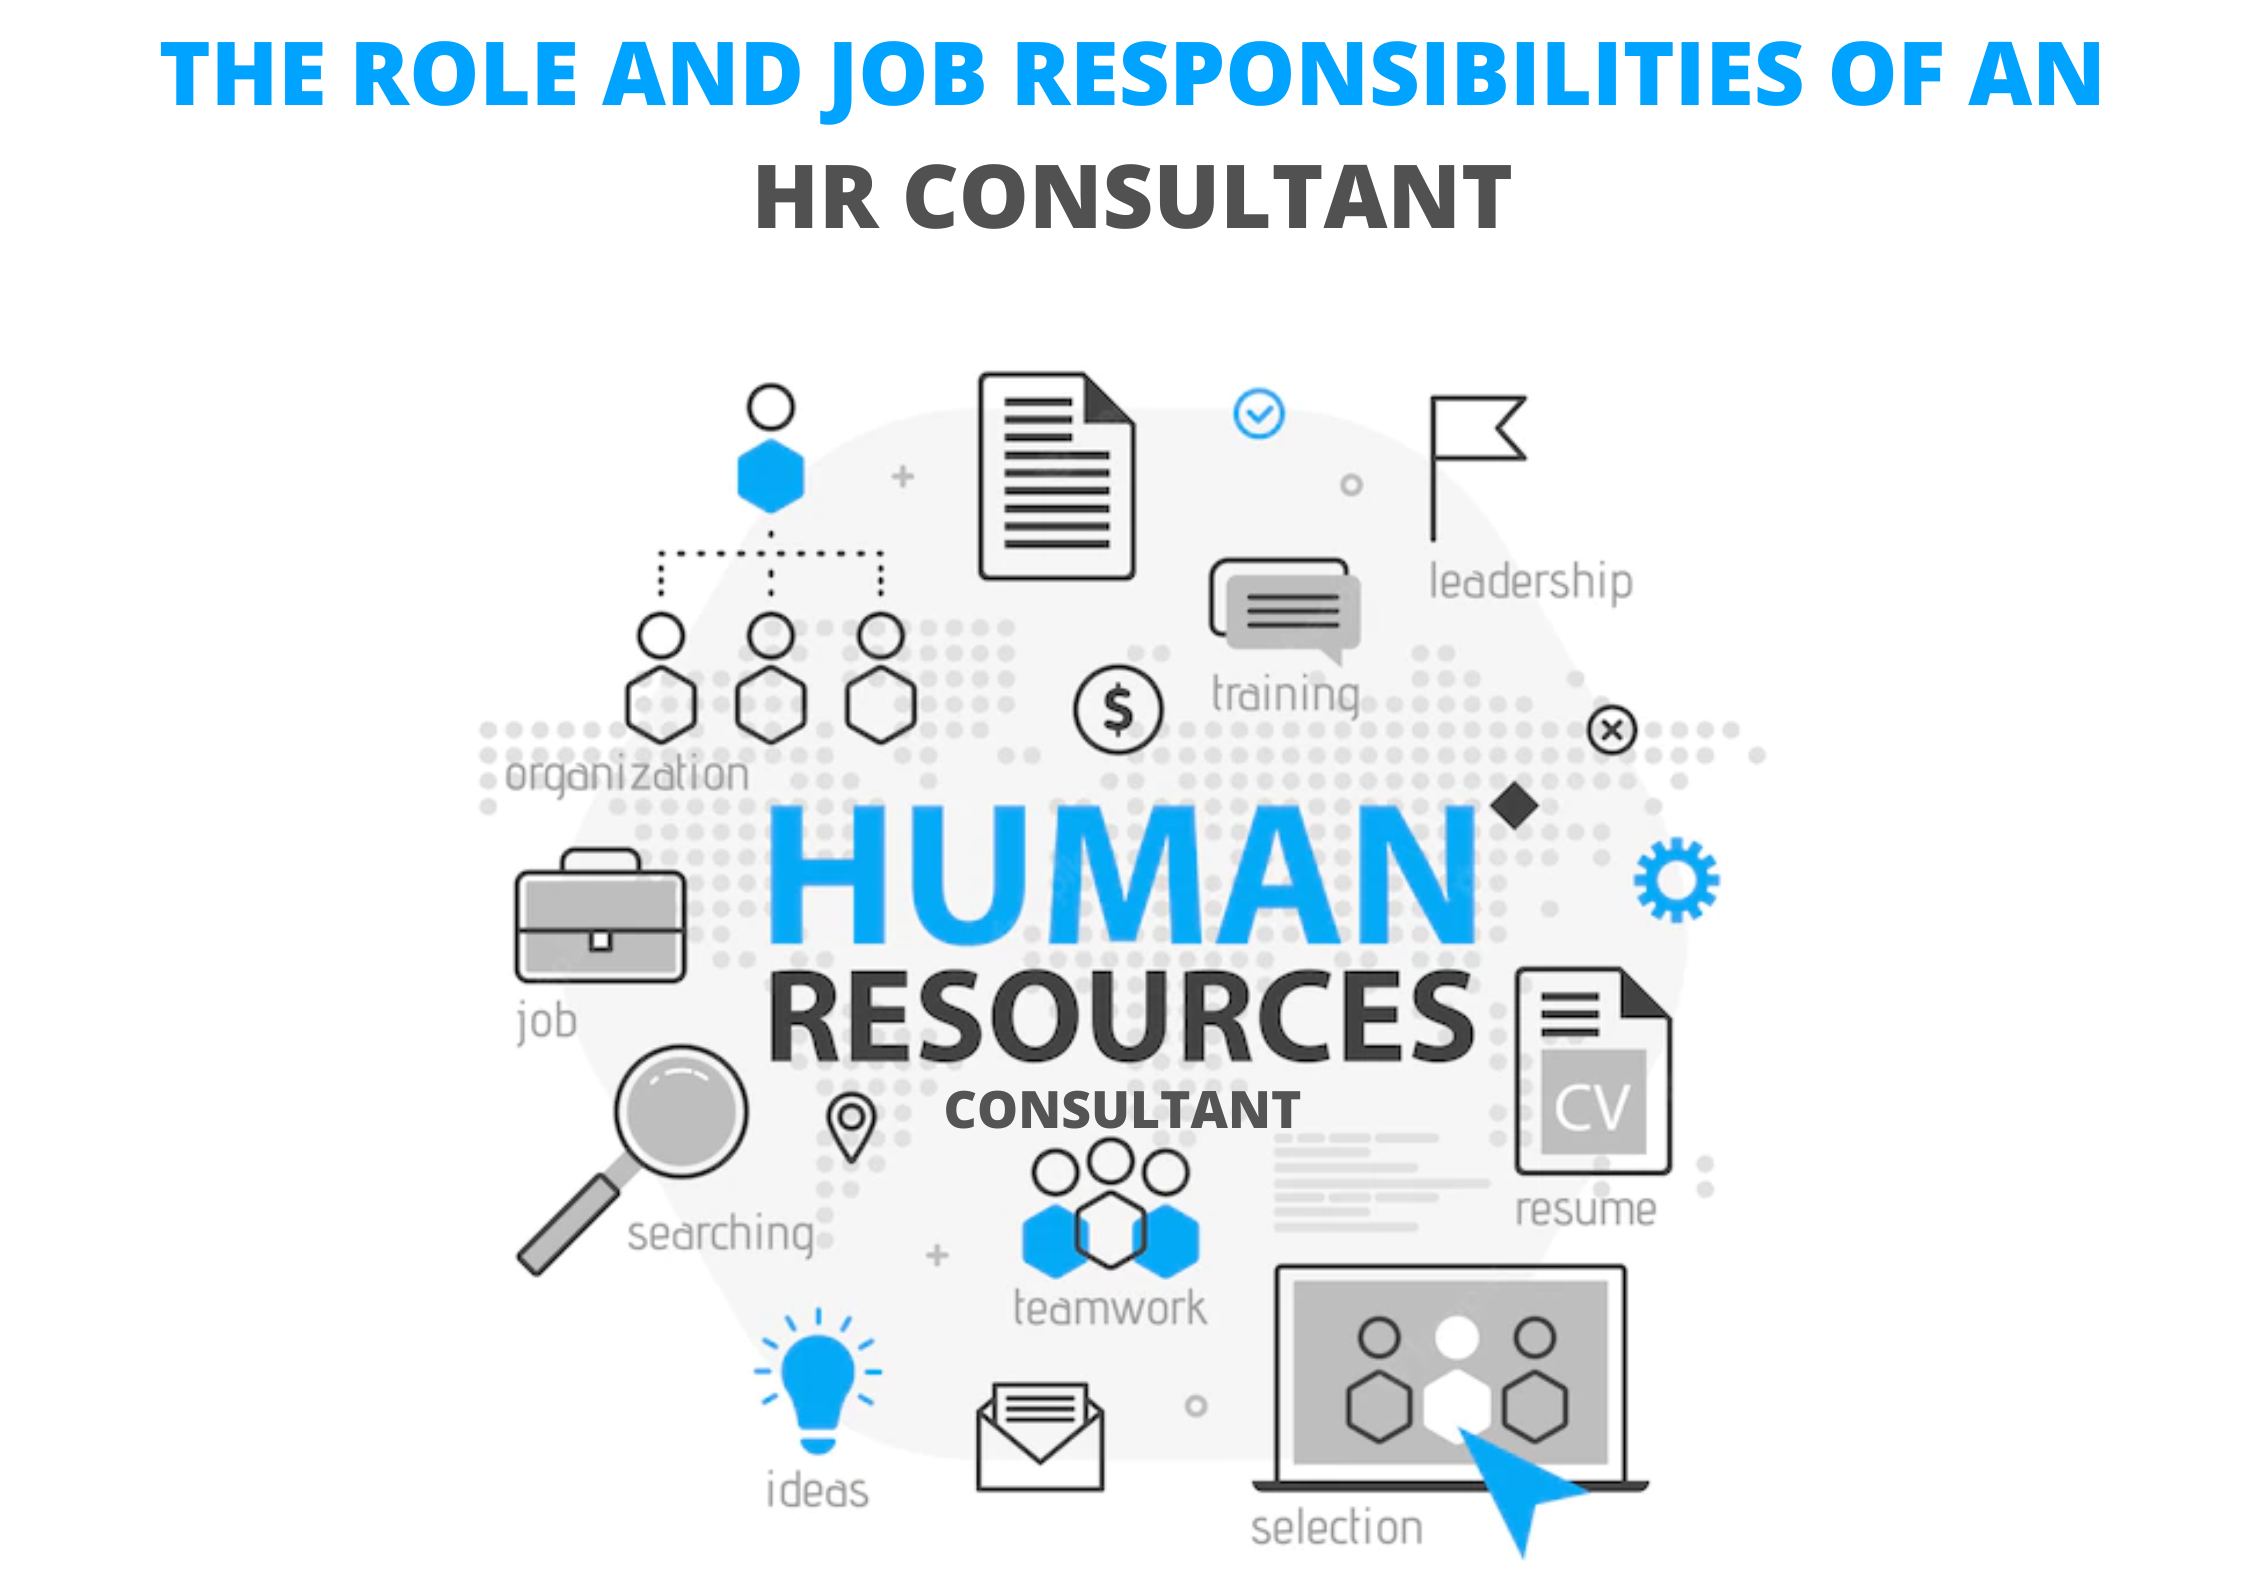 The Role and Job Responsibilities of an HR Consultant